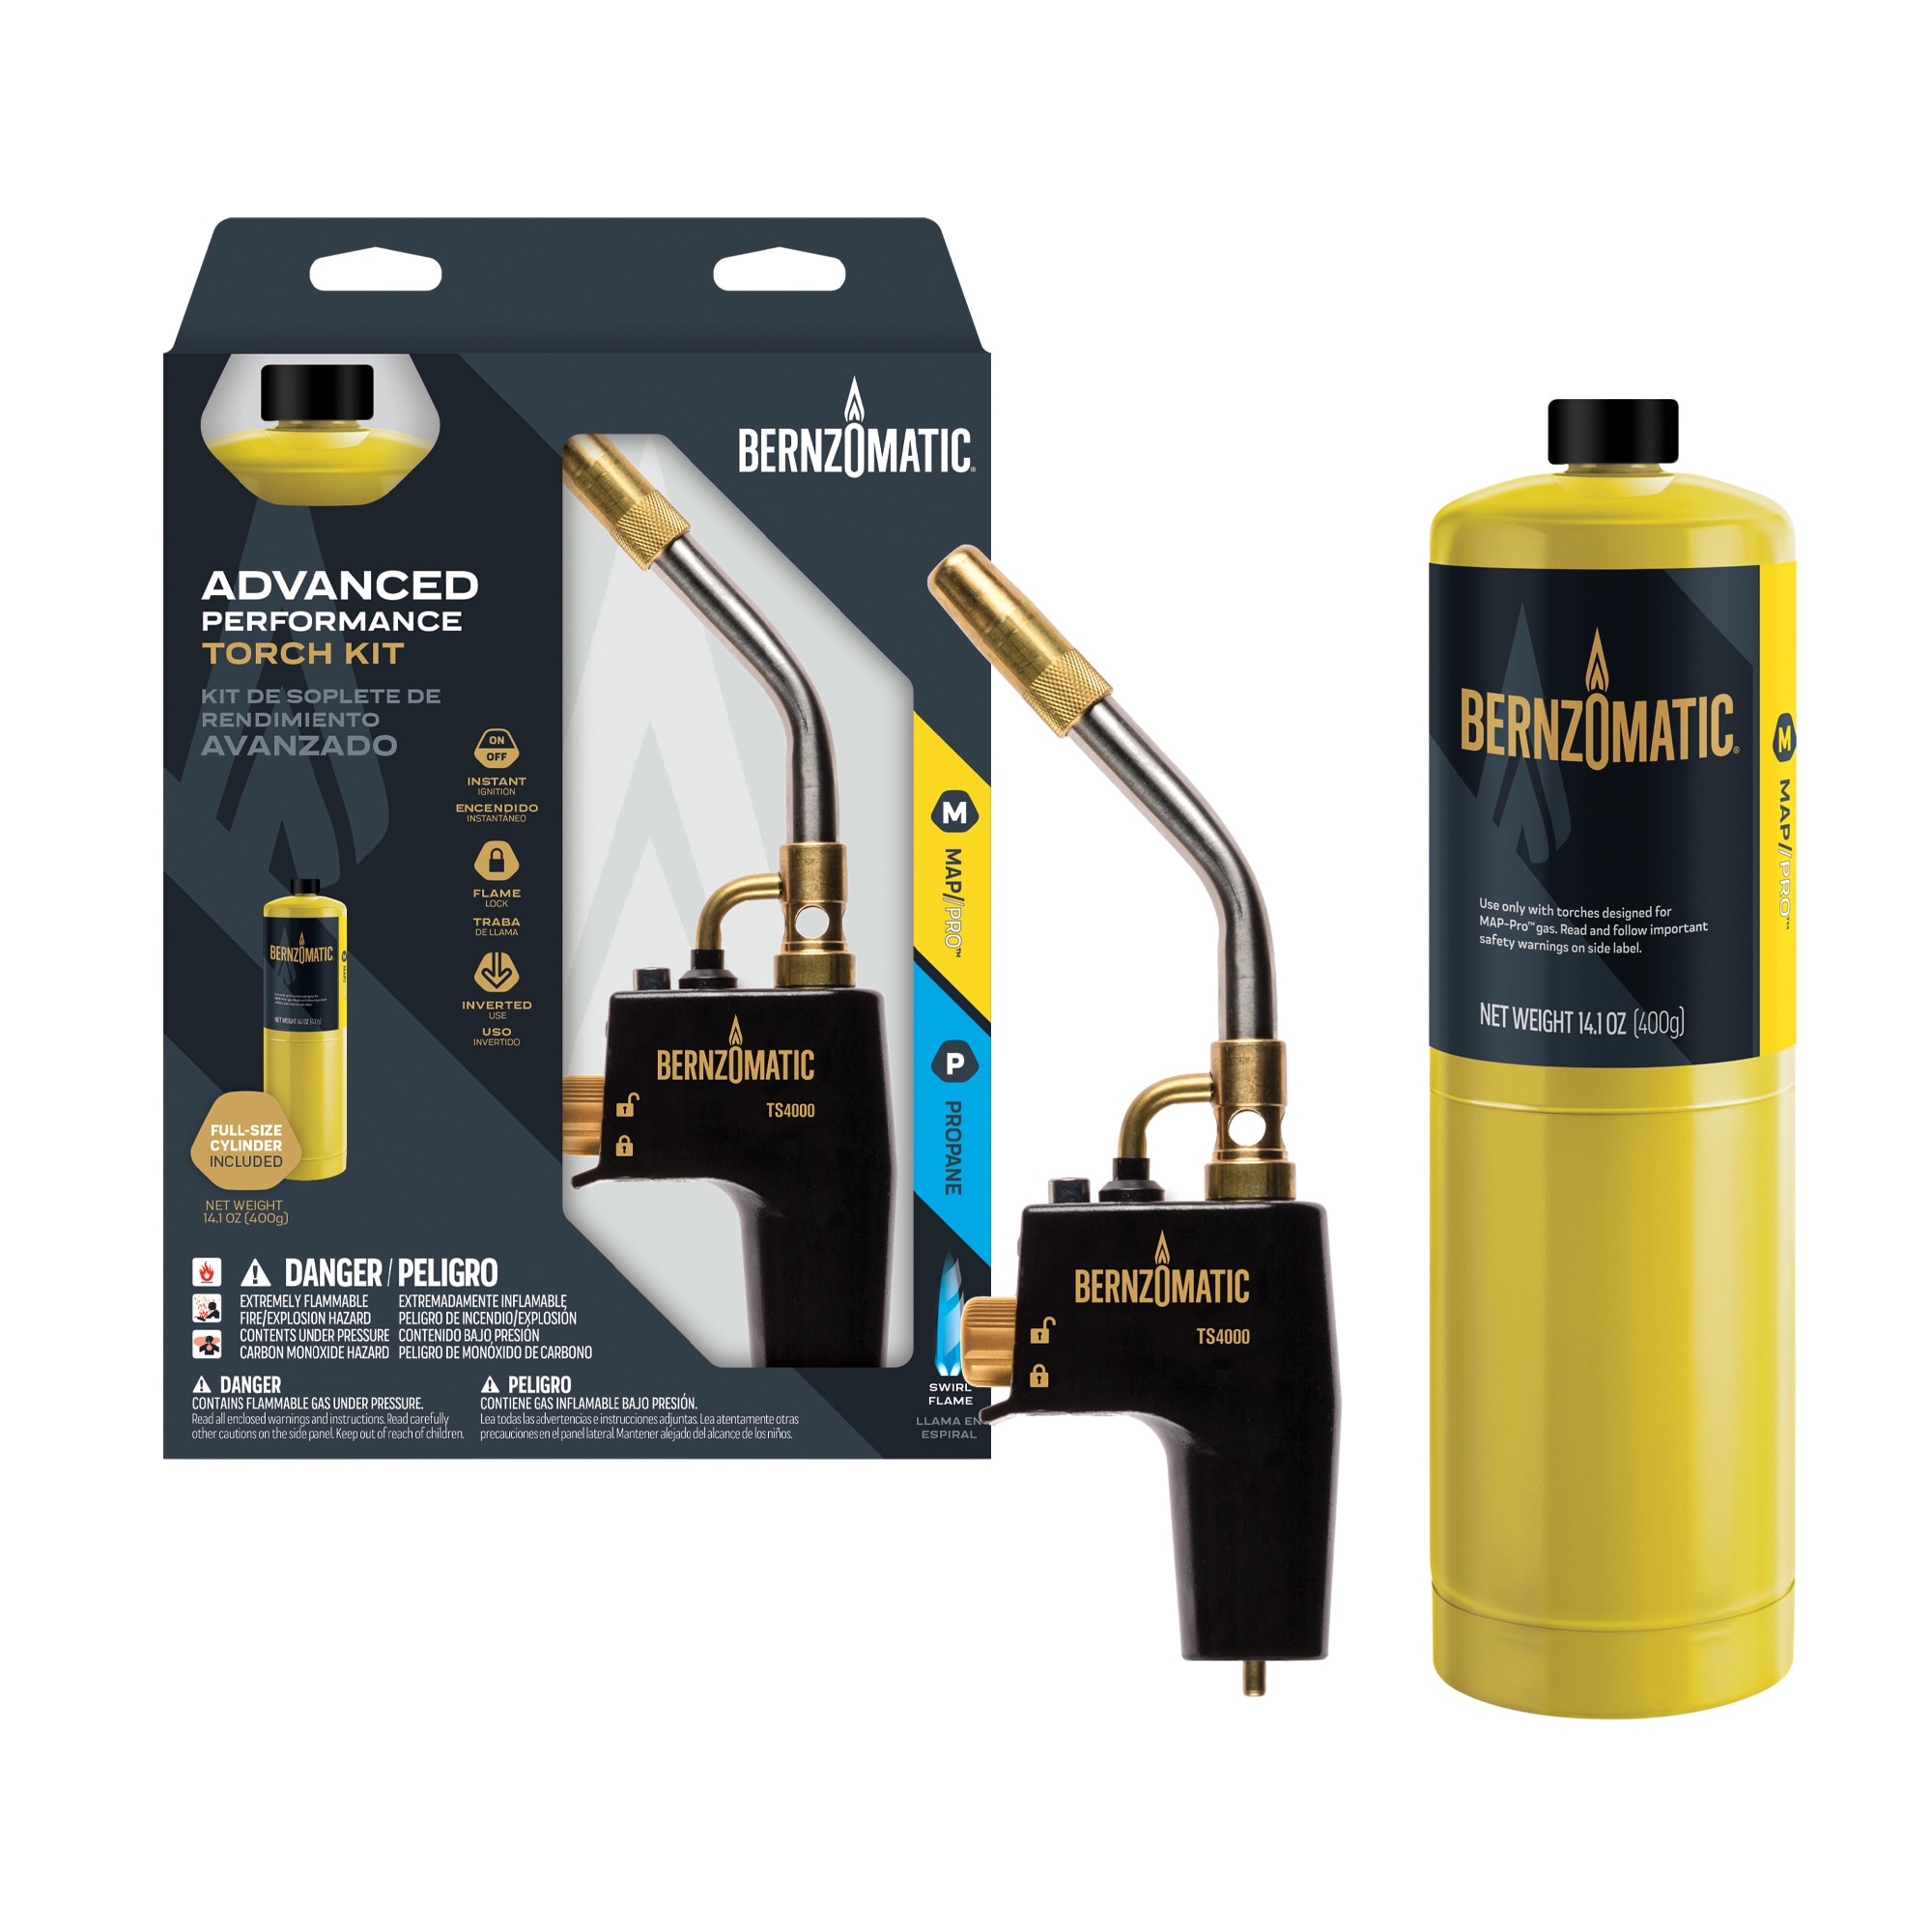 BernzOmatic Soldering and Brazing Propylene Torch Kit (14.1-oz) at